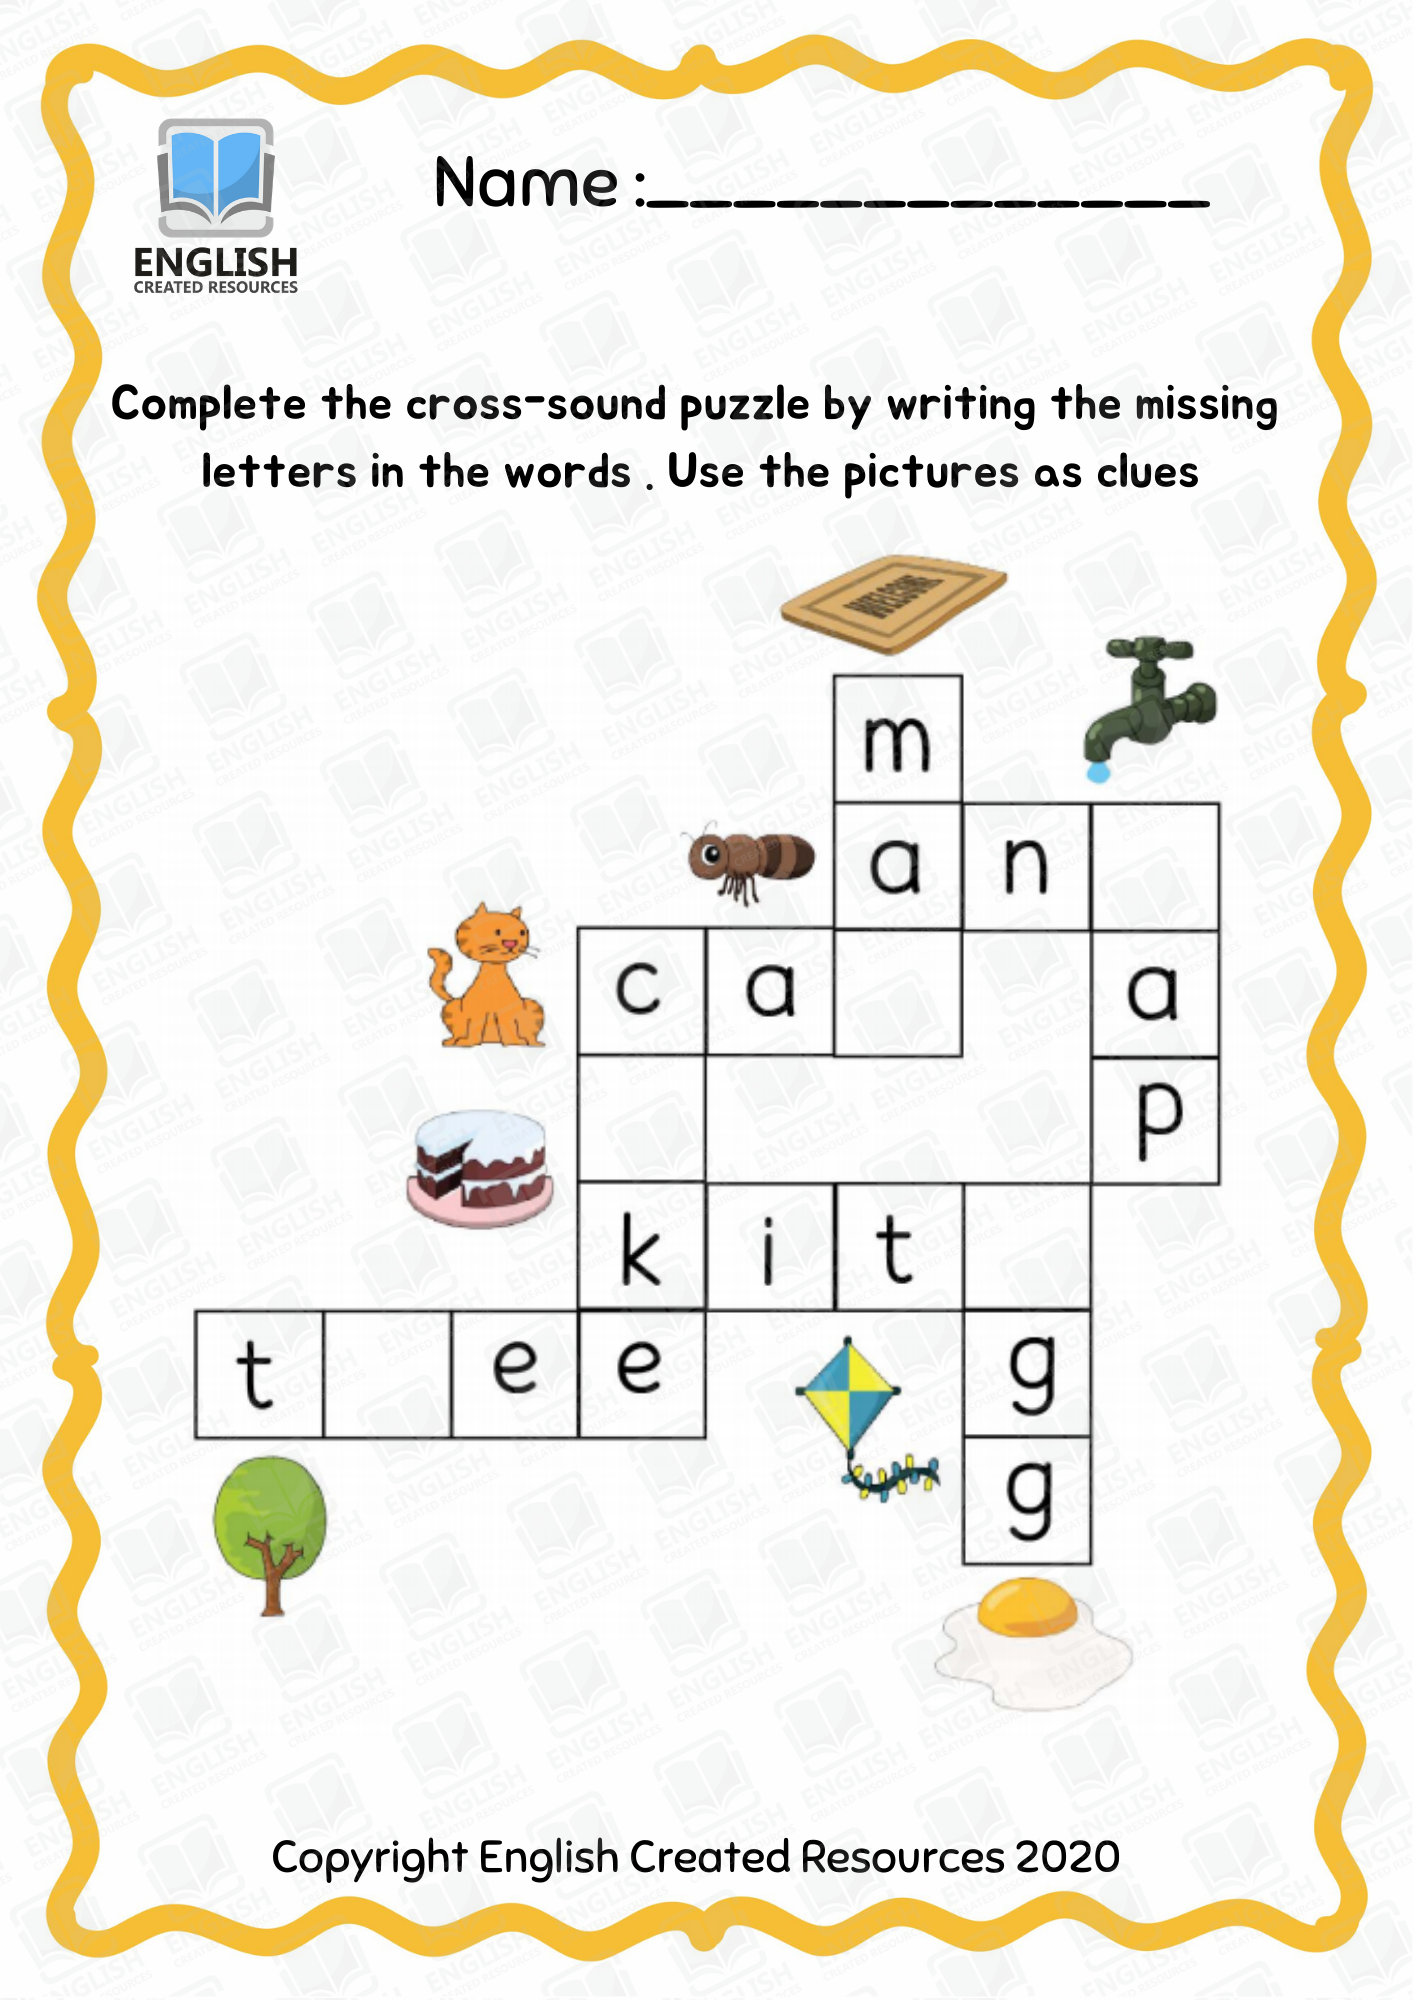 Crossword Puzzles For Esl Students Printable Crossword Puzzles Printable